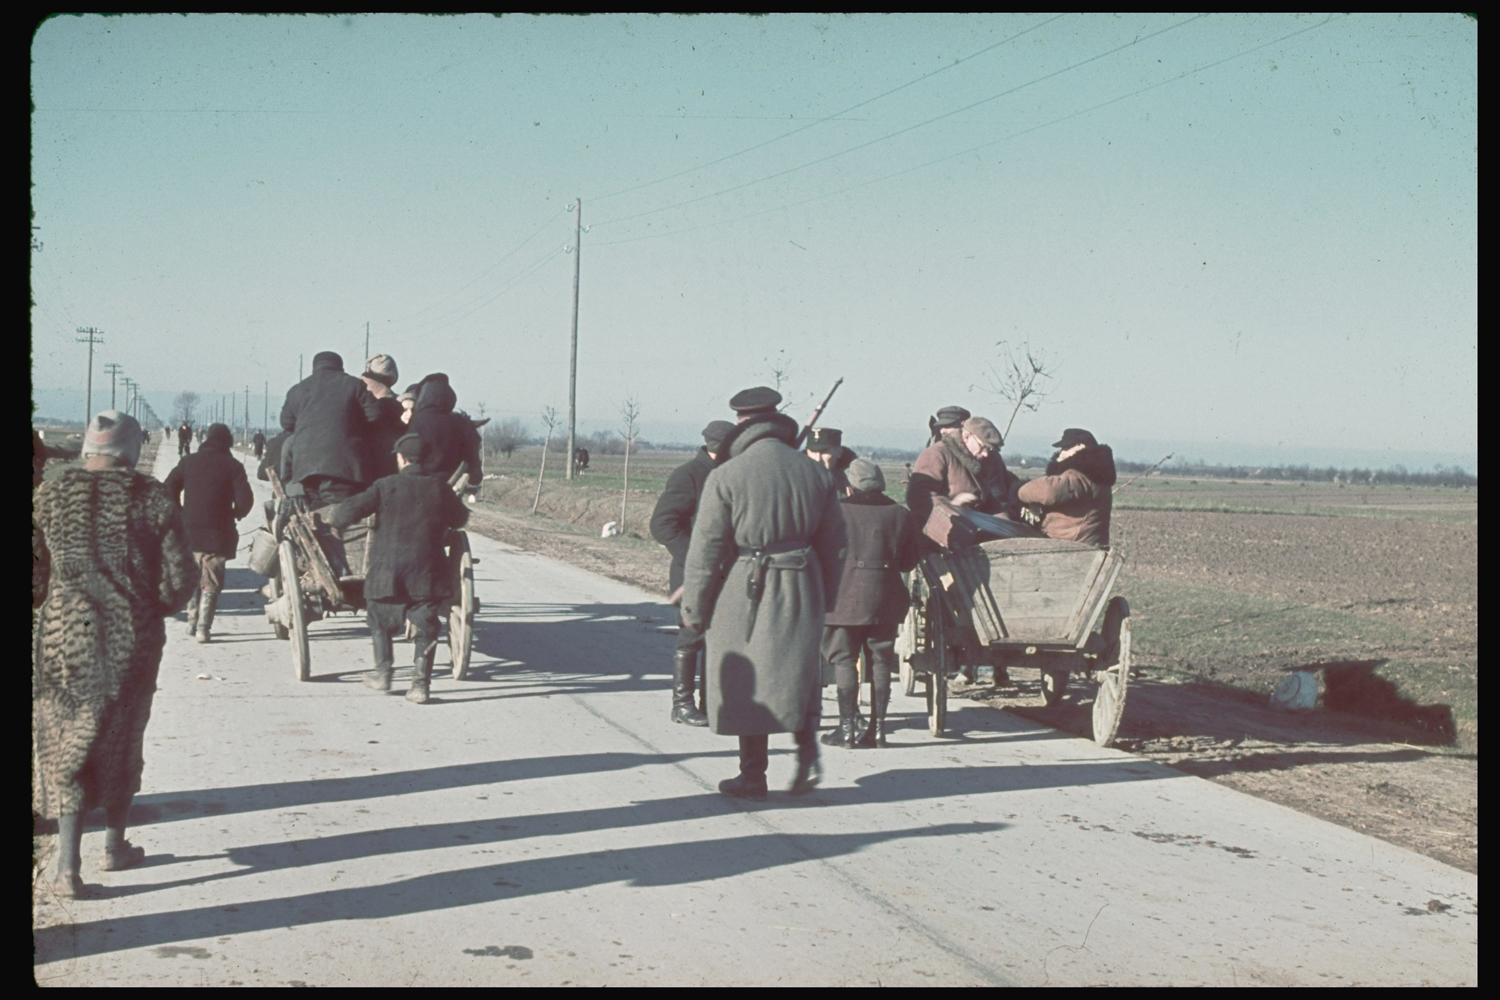 Polish farmers and peasants flee German military during invasion of their country, 1939.